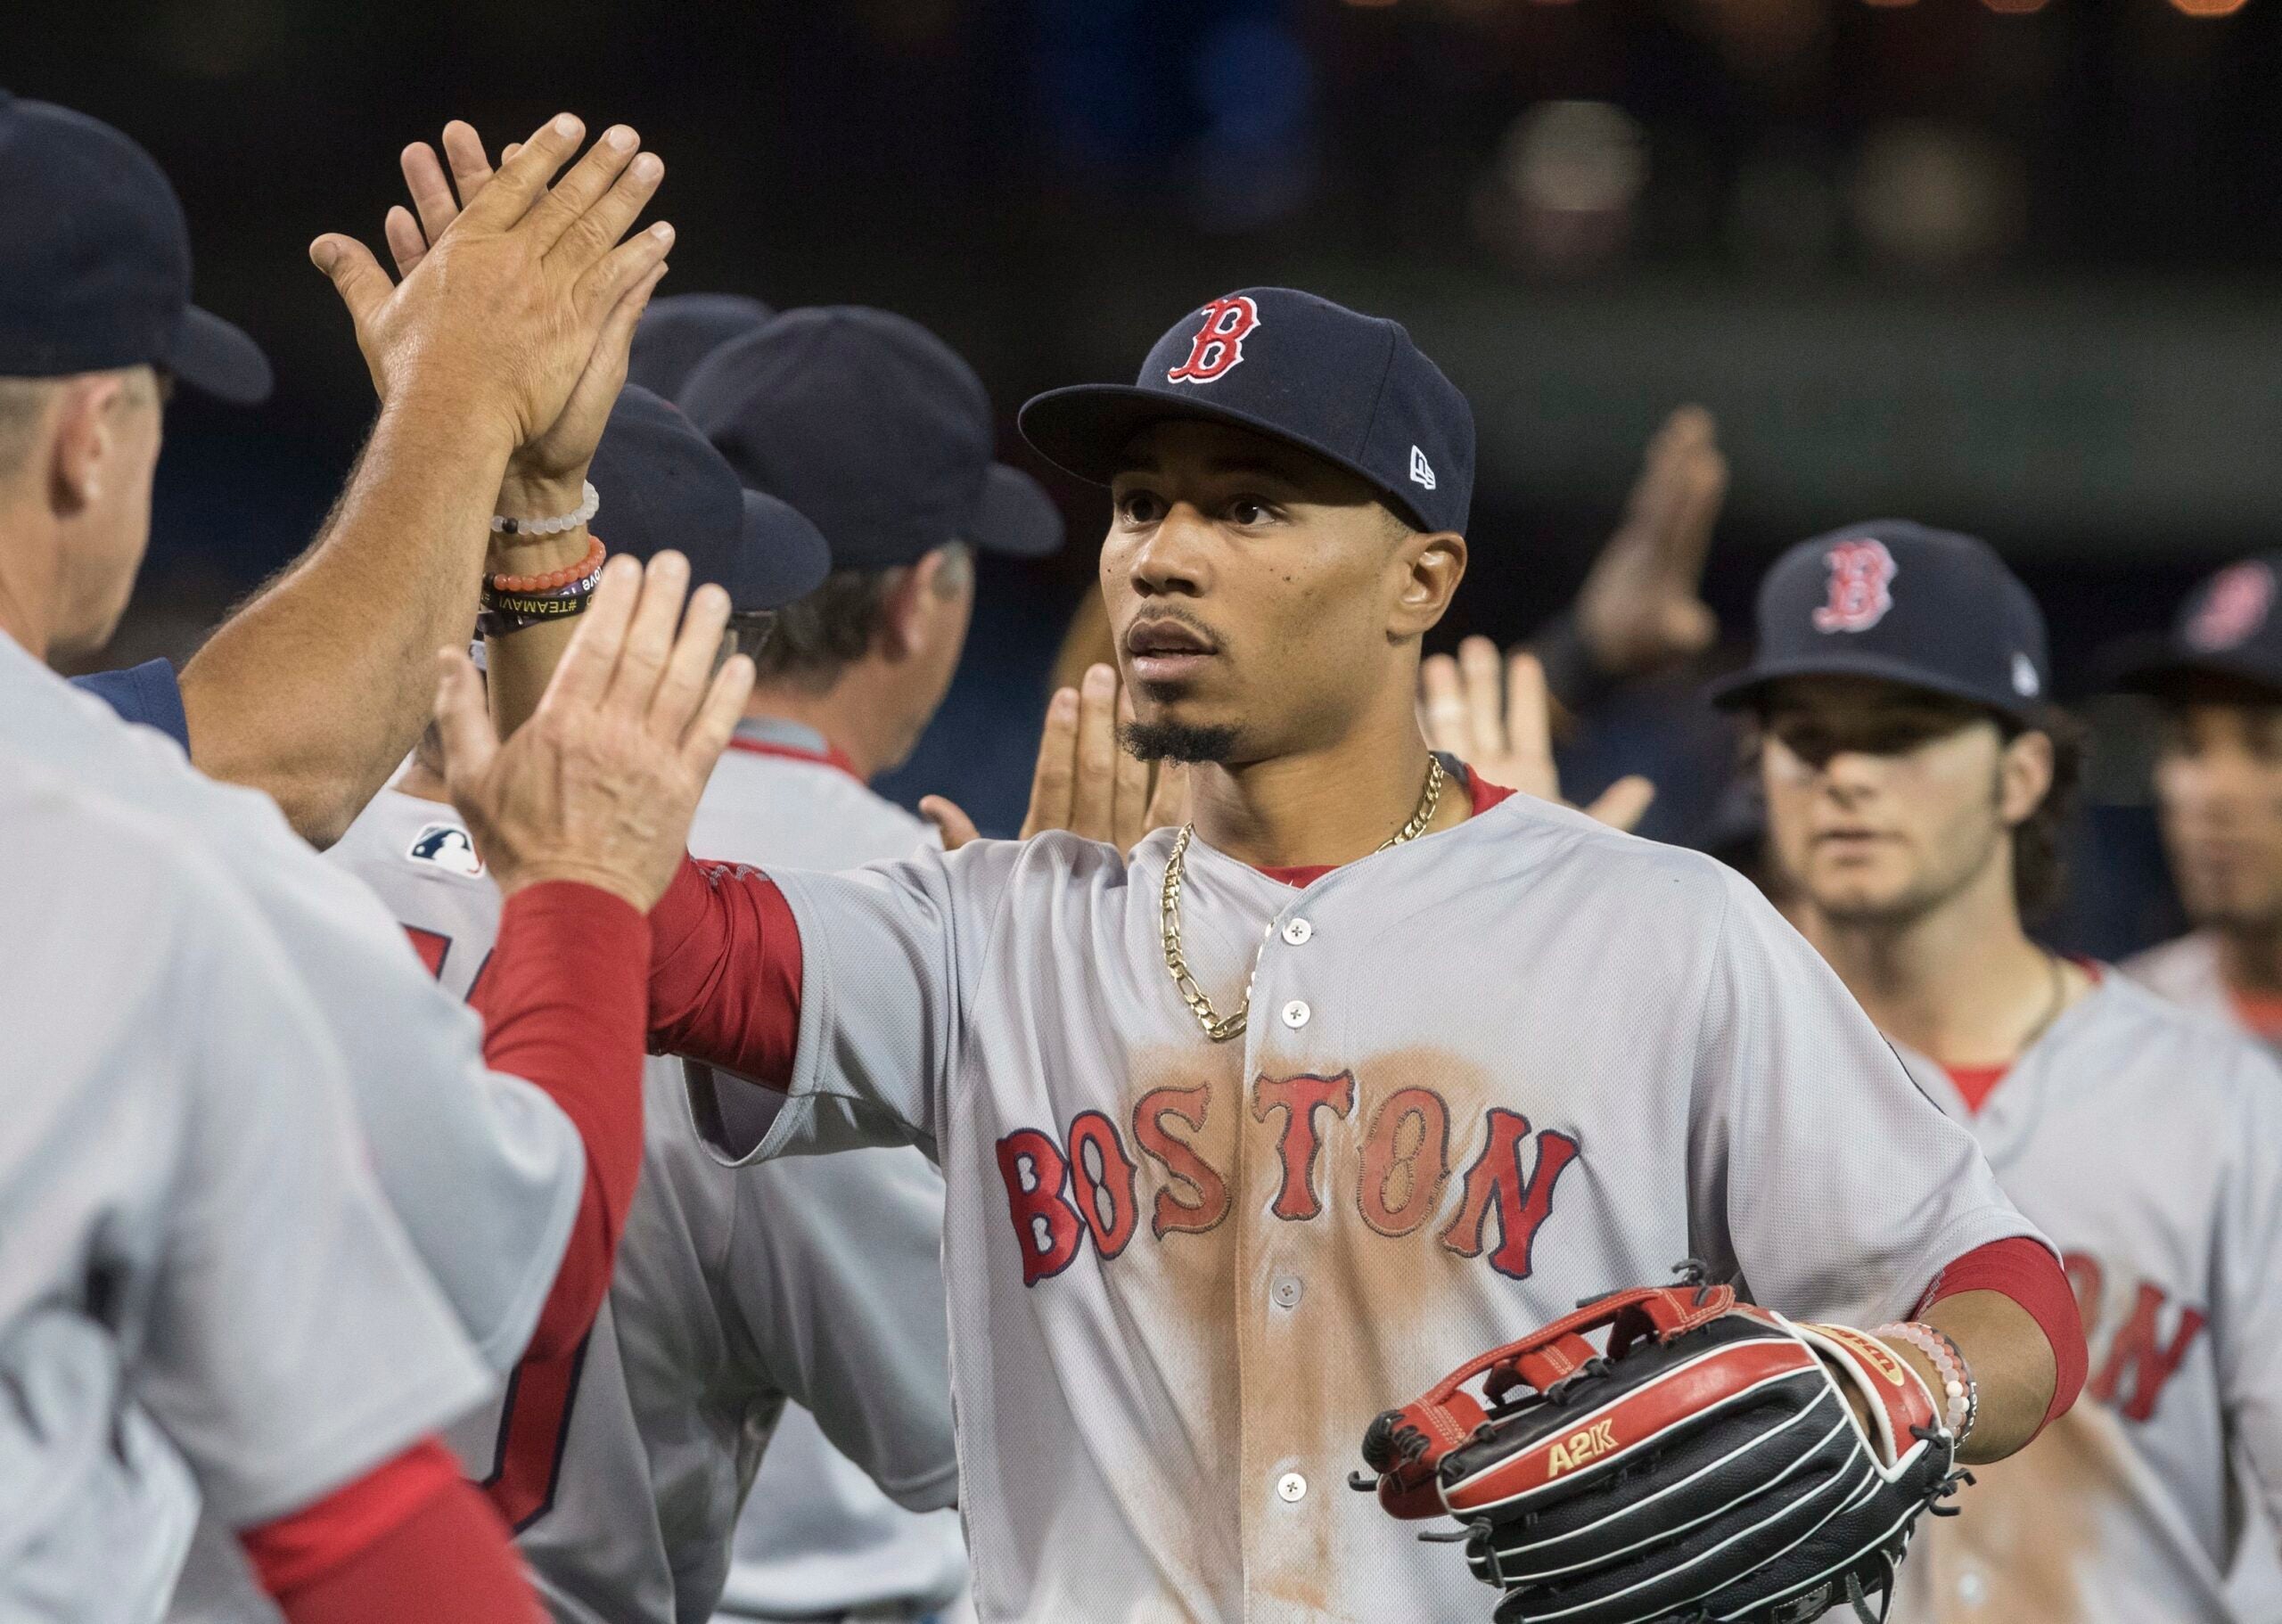 Watch Mookie Betts and Hanley Ramirez hit back-to-back homers in the first  inning against the Orioles